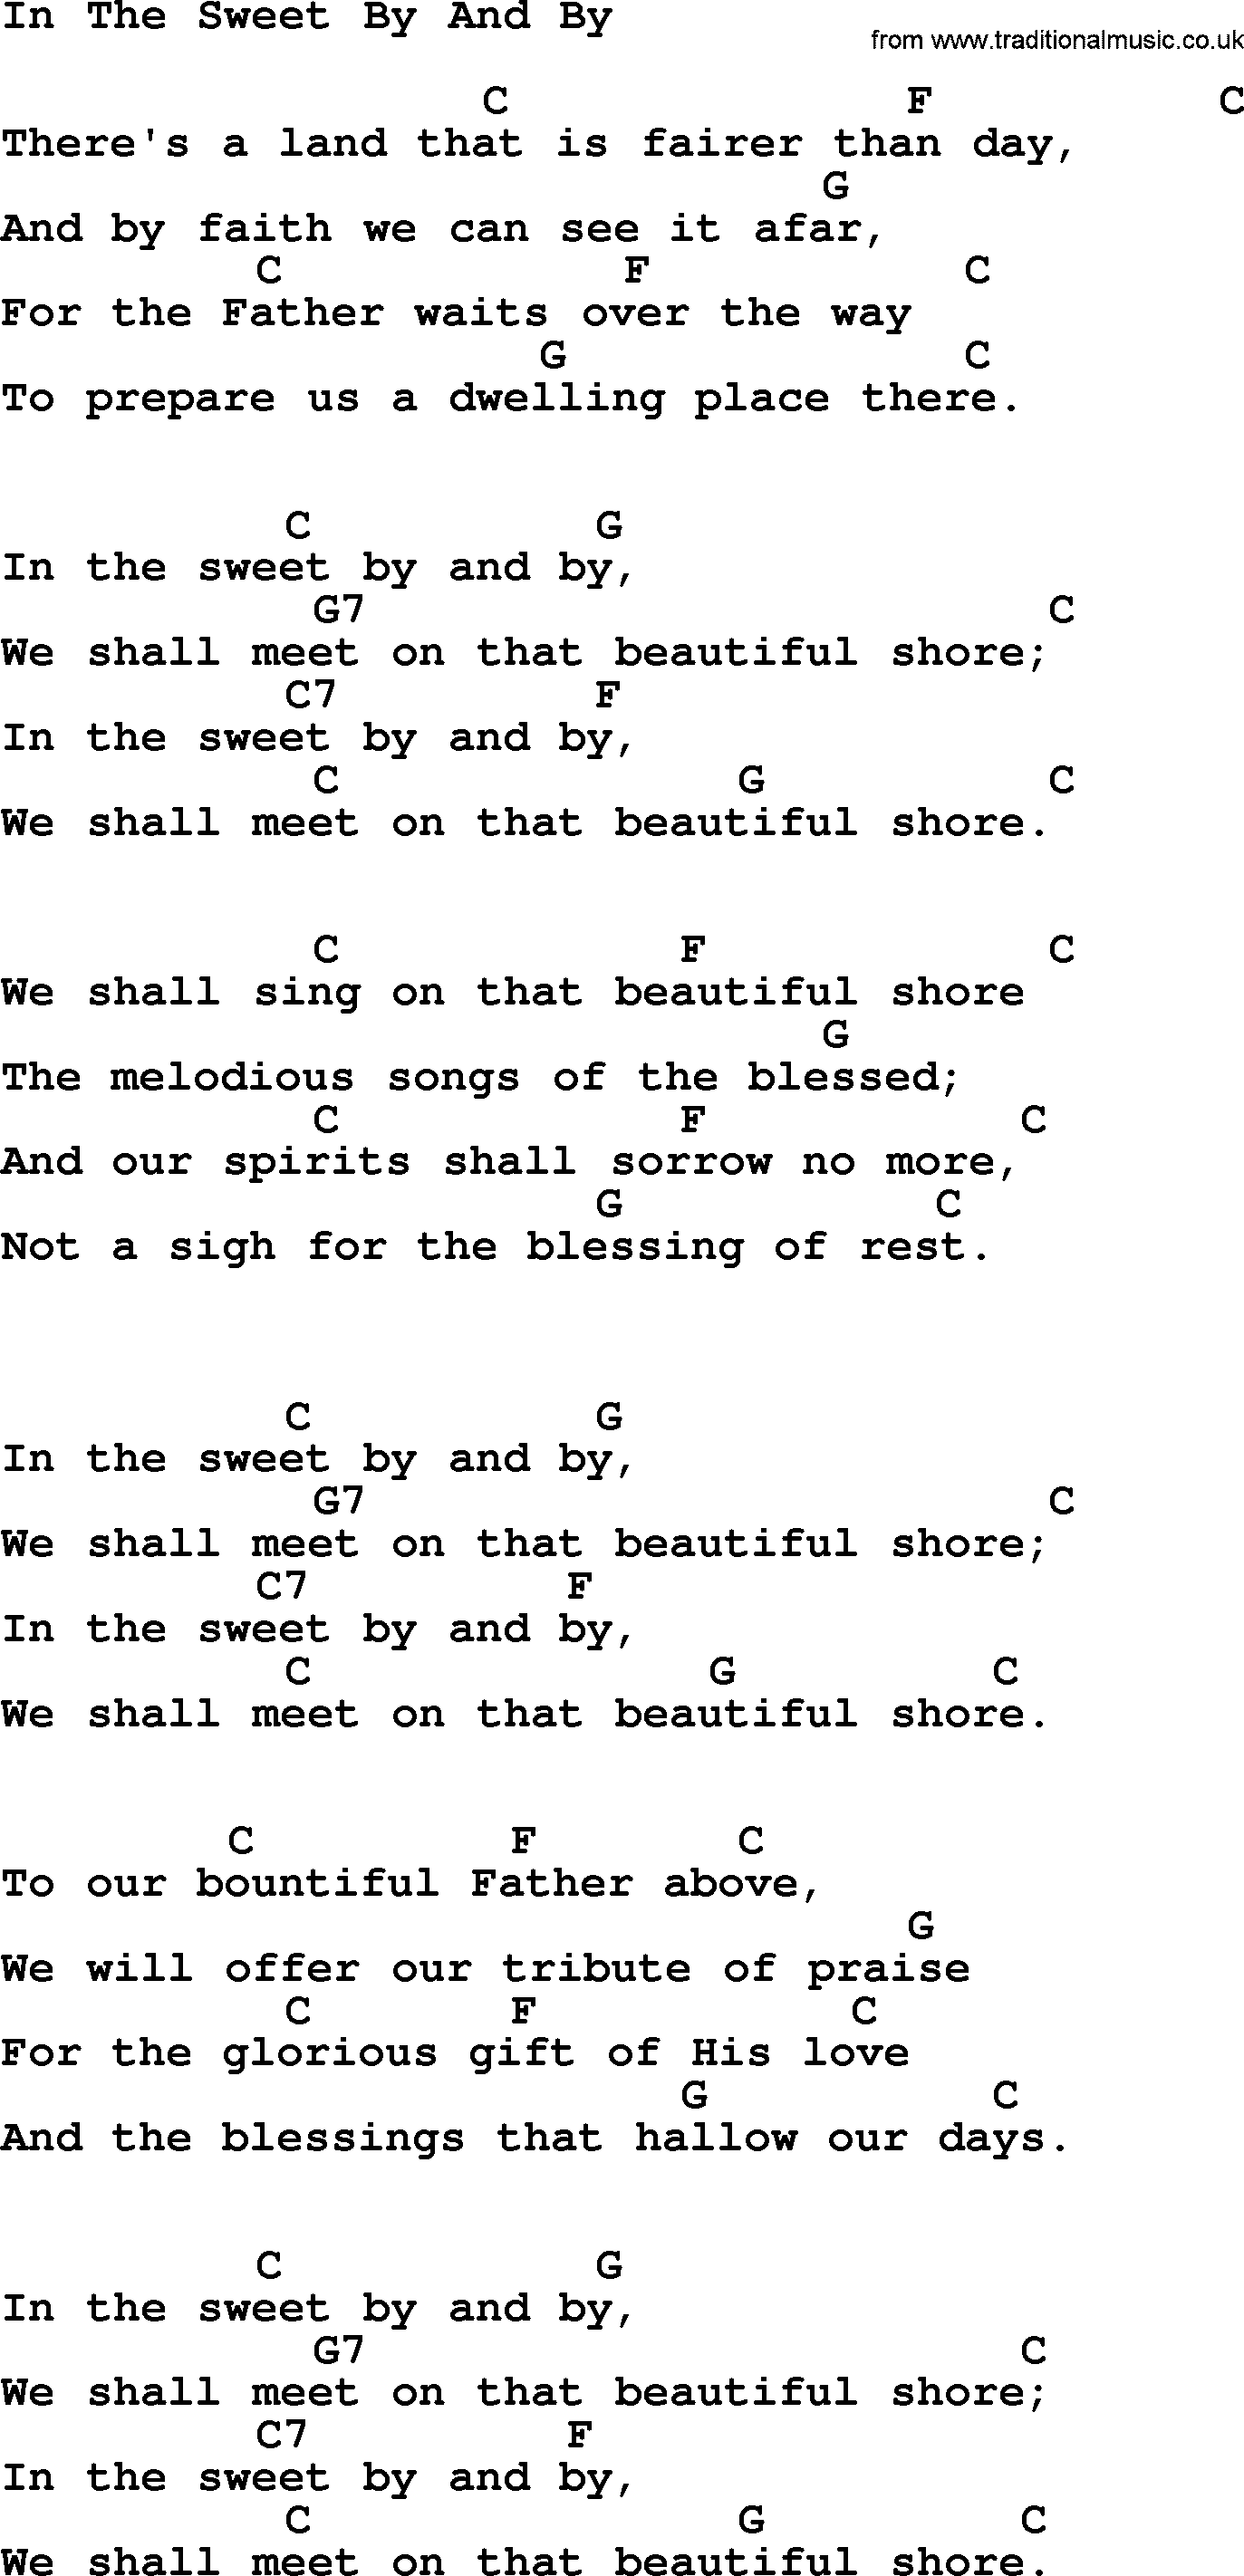 Johnny Cash song In The Sweet By And By, lyrics and chords